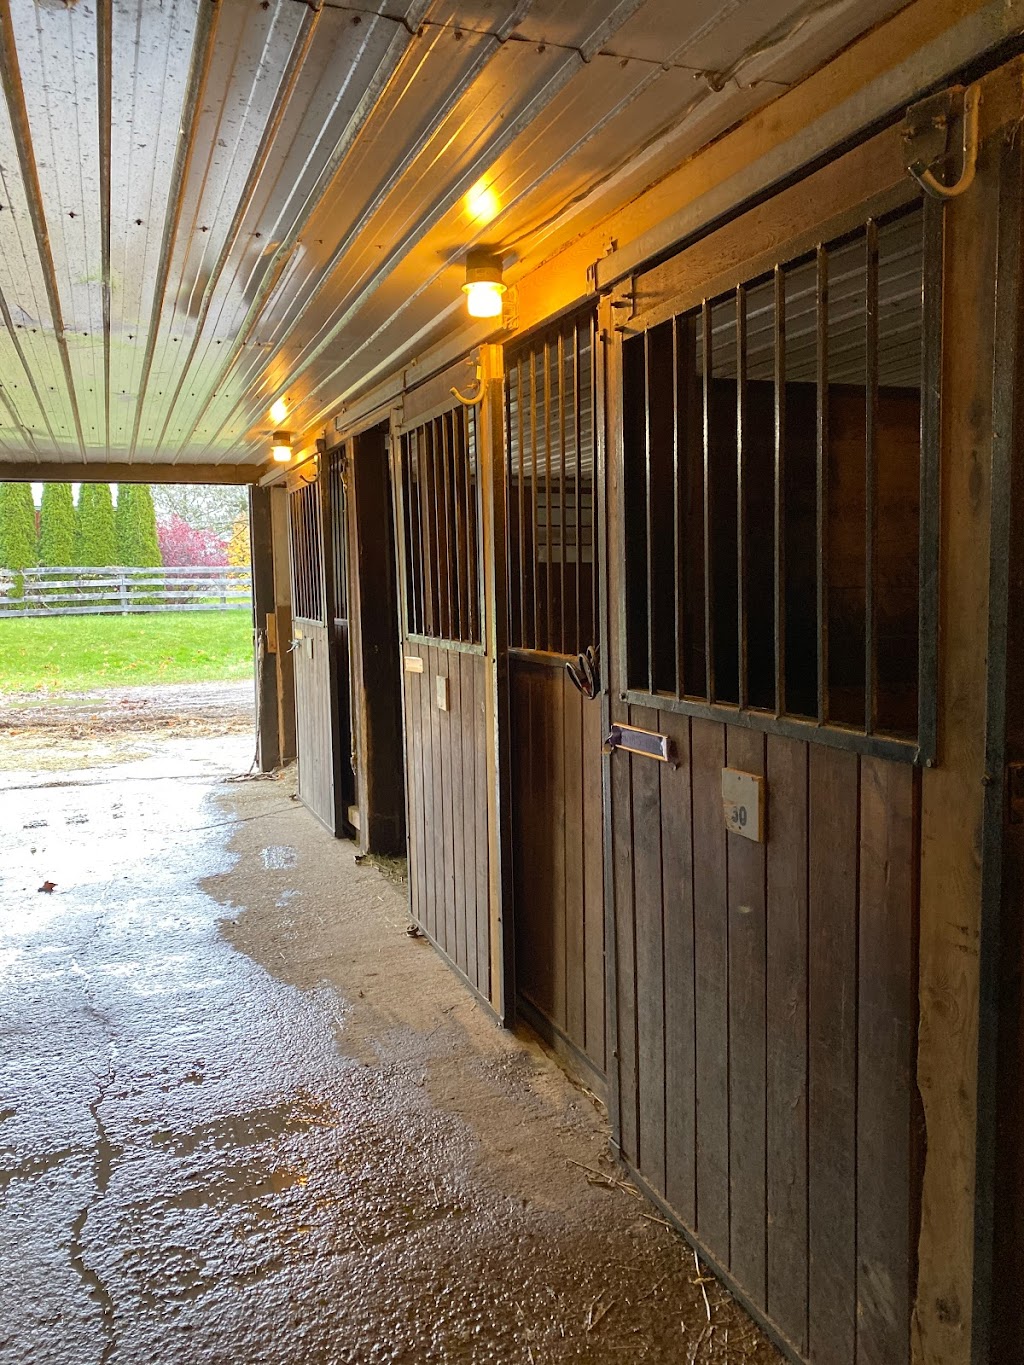 Kingsway Equestrian | point of interest | 2089 Brock Rd, Uxbridge, ON L9P 1R4, Canada | 4163582124 OR +1 416-358-2124